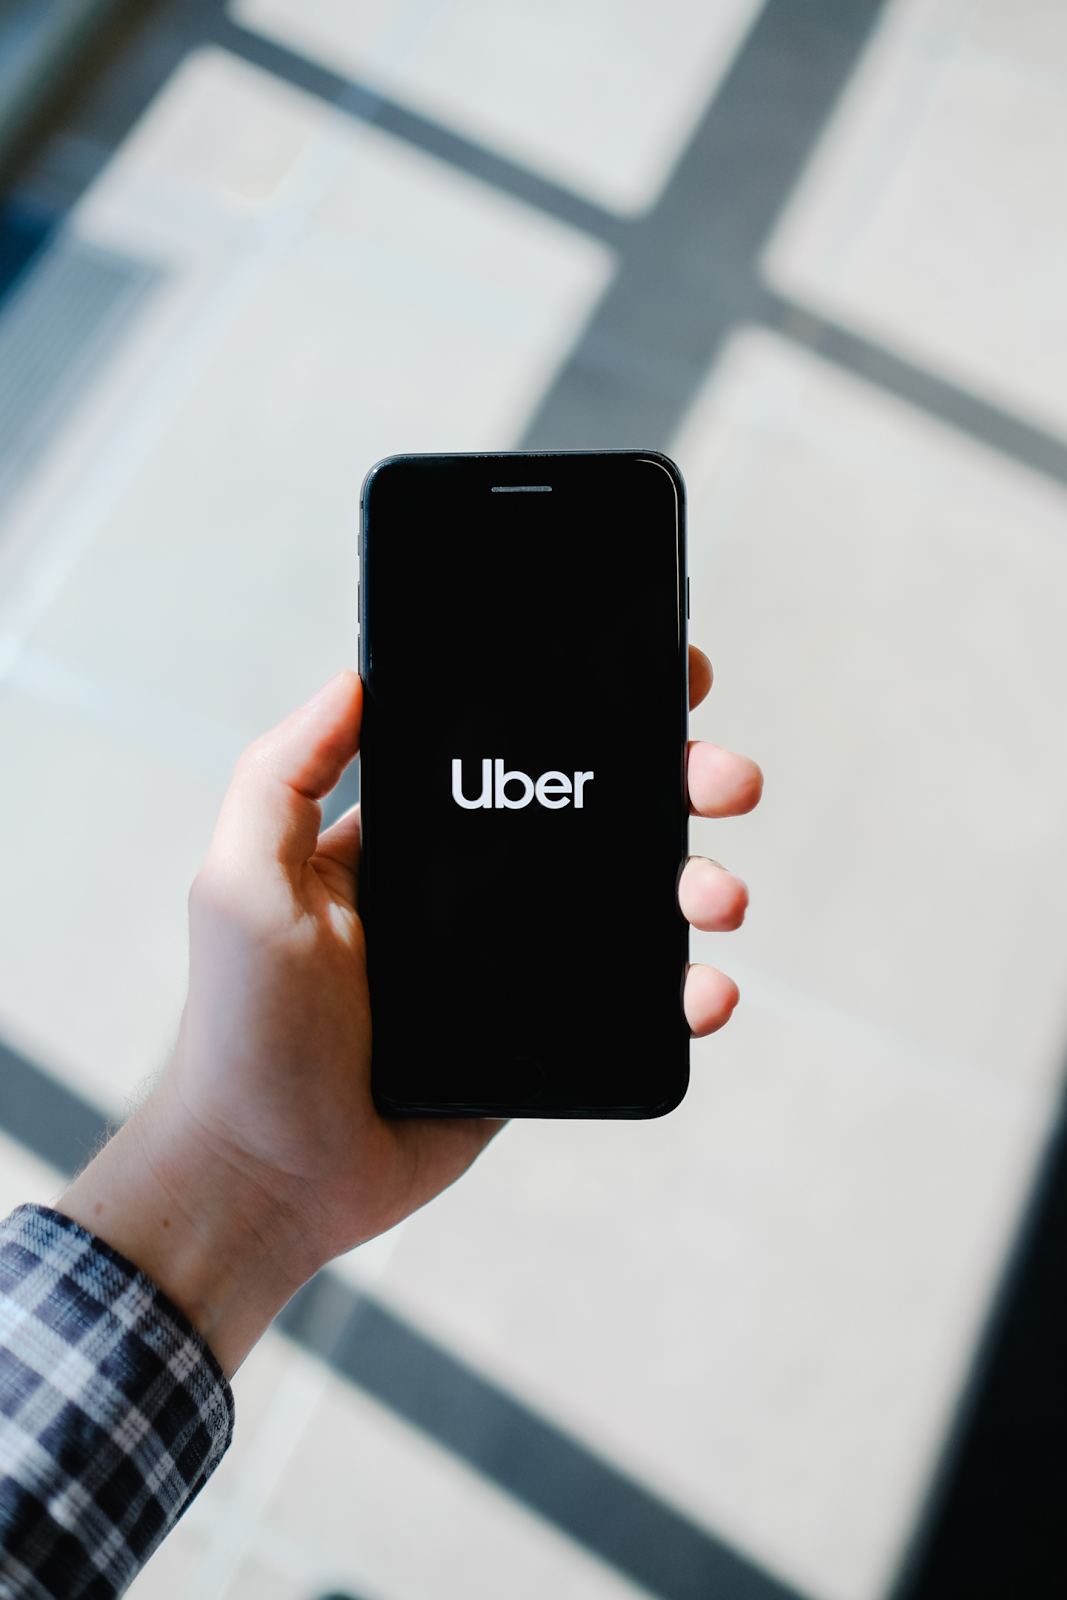 uber pulled up on someones phone, insurance company after car accidents involving uber